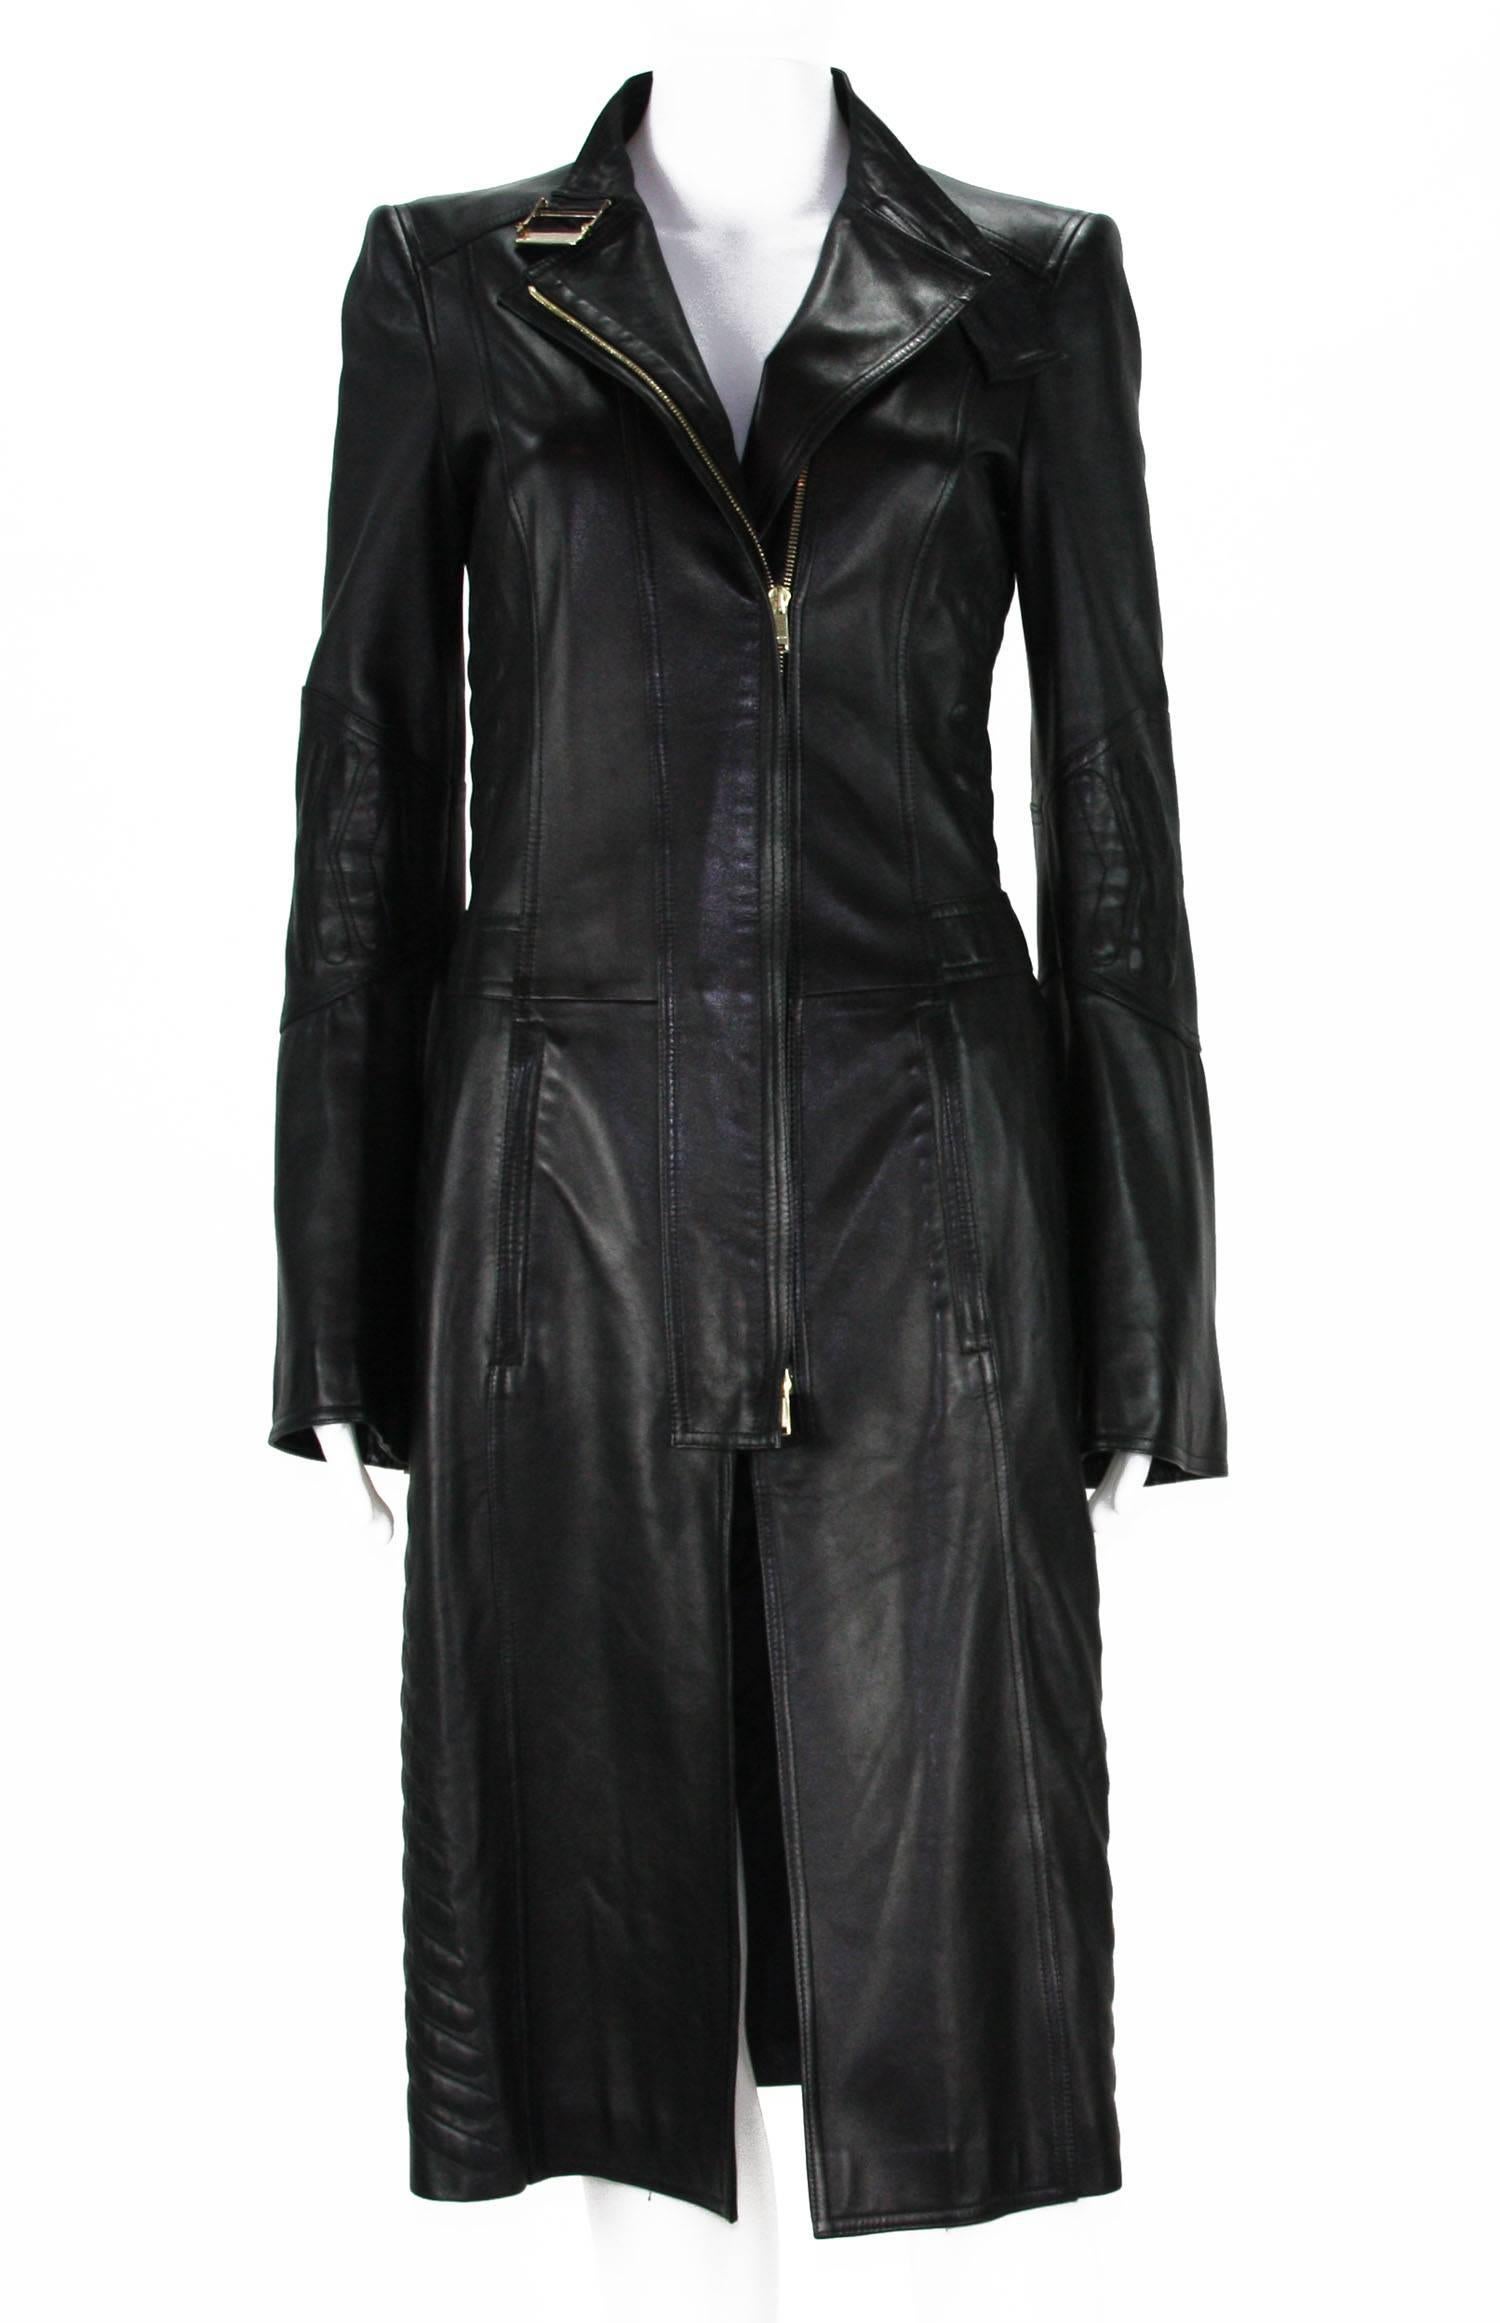 Rare TOM FORD for GUCCI Collectible Coat
2004 Collection
Italian Size 40 – US 4
100% Soft Leather - Color Black, Top Stitching Around - Chevron Quilting, Front Double Snap Closure.
Two Side Pockets with Zippers, Zip Cuffs on Sleeves, Fully Lined,